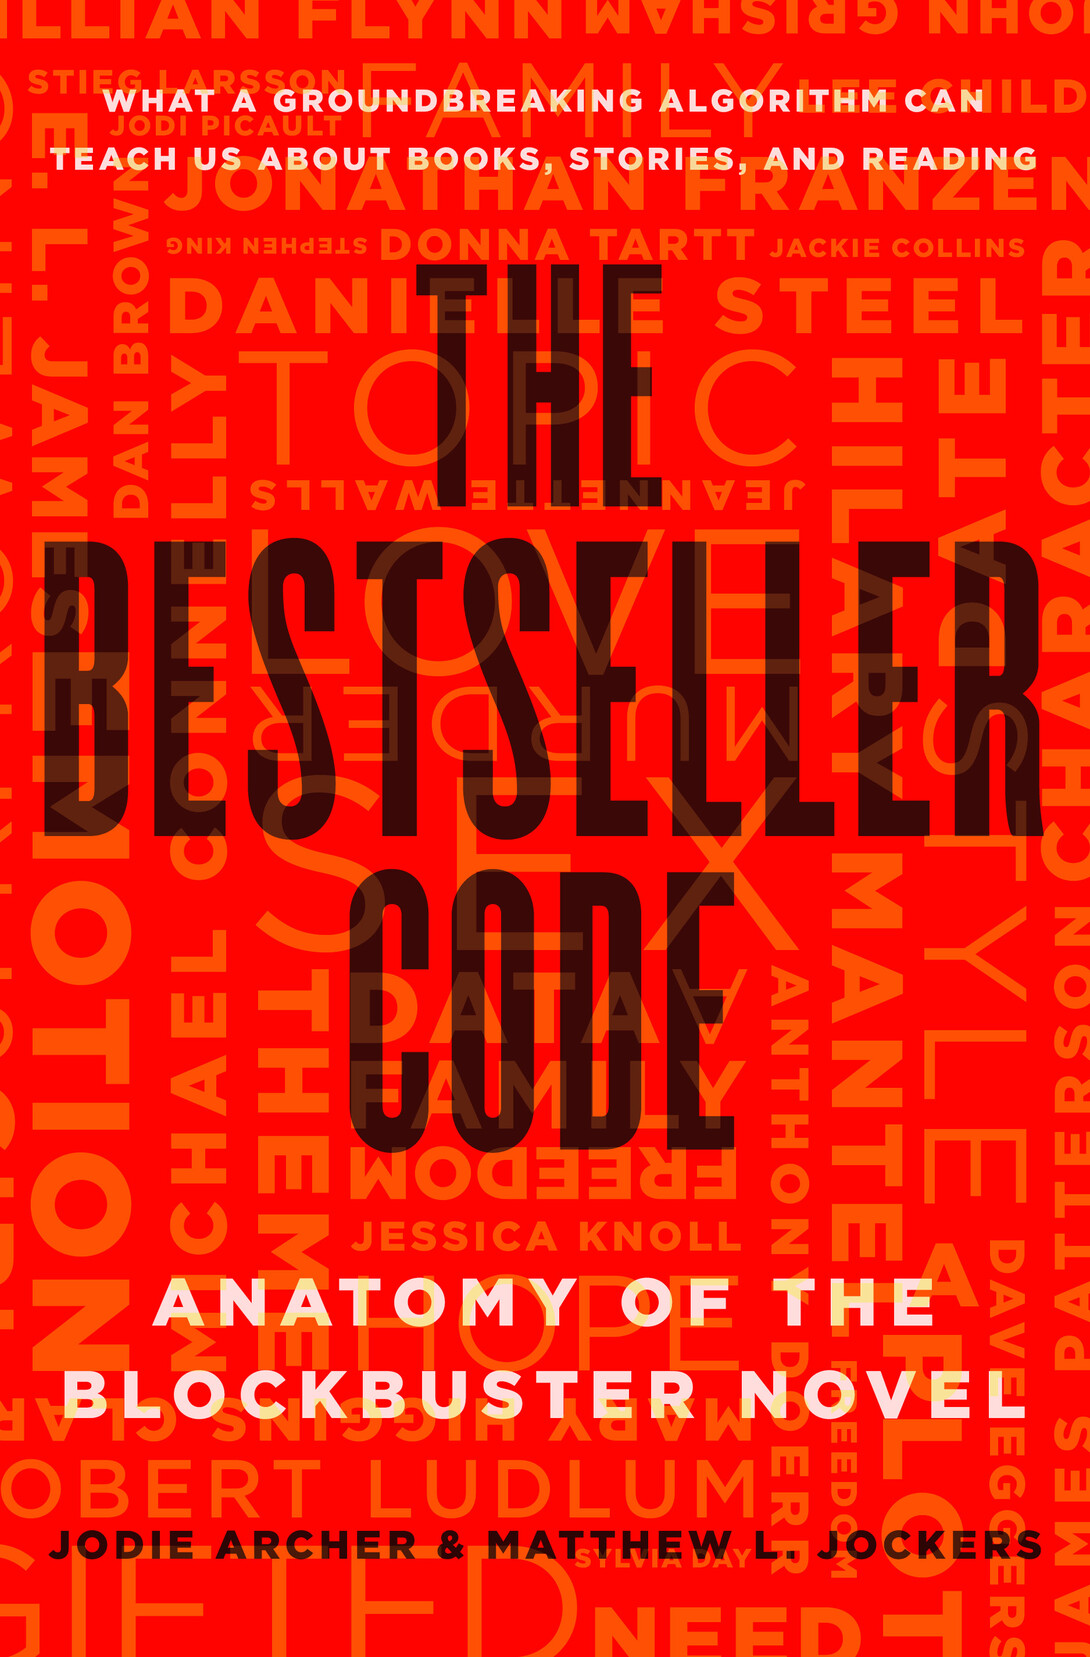 Cover of THE BESTSELLER CODE by Matthew Jockers and Jodi Archer